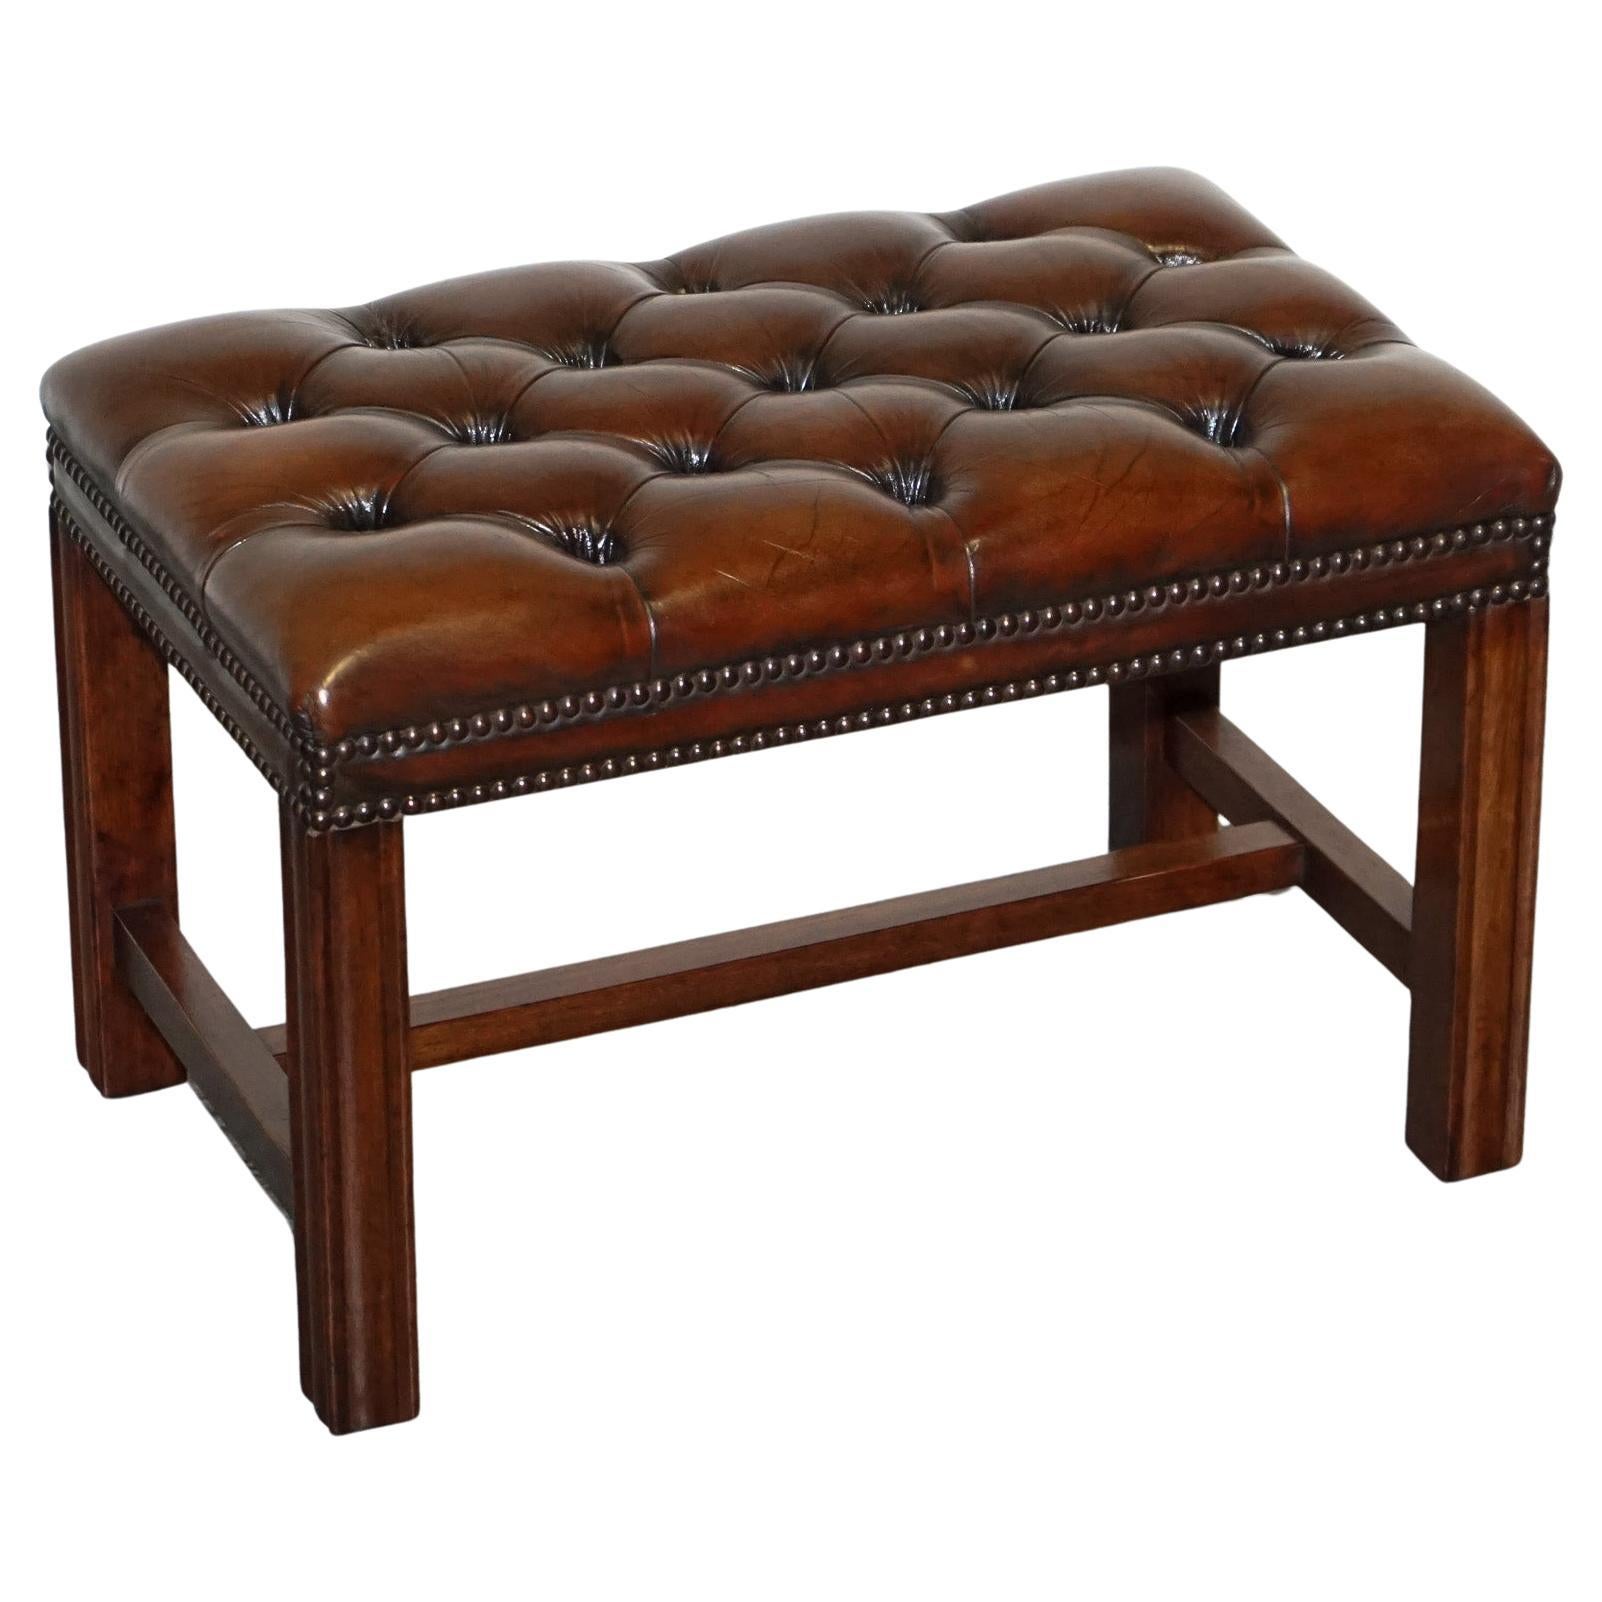 VINTAGE RESTORED CHESTERFiELD HANDDYED BROWN LEATHER TUFFED FOOTSTOOL